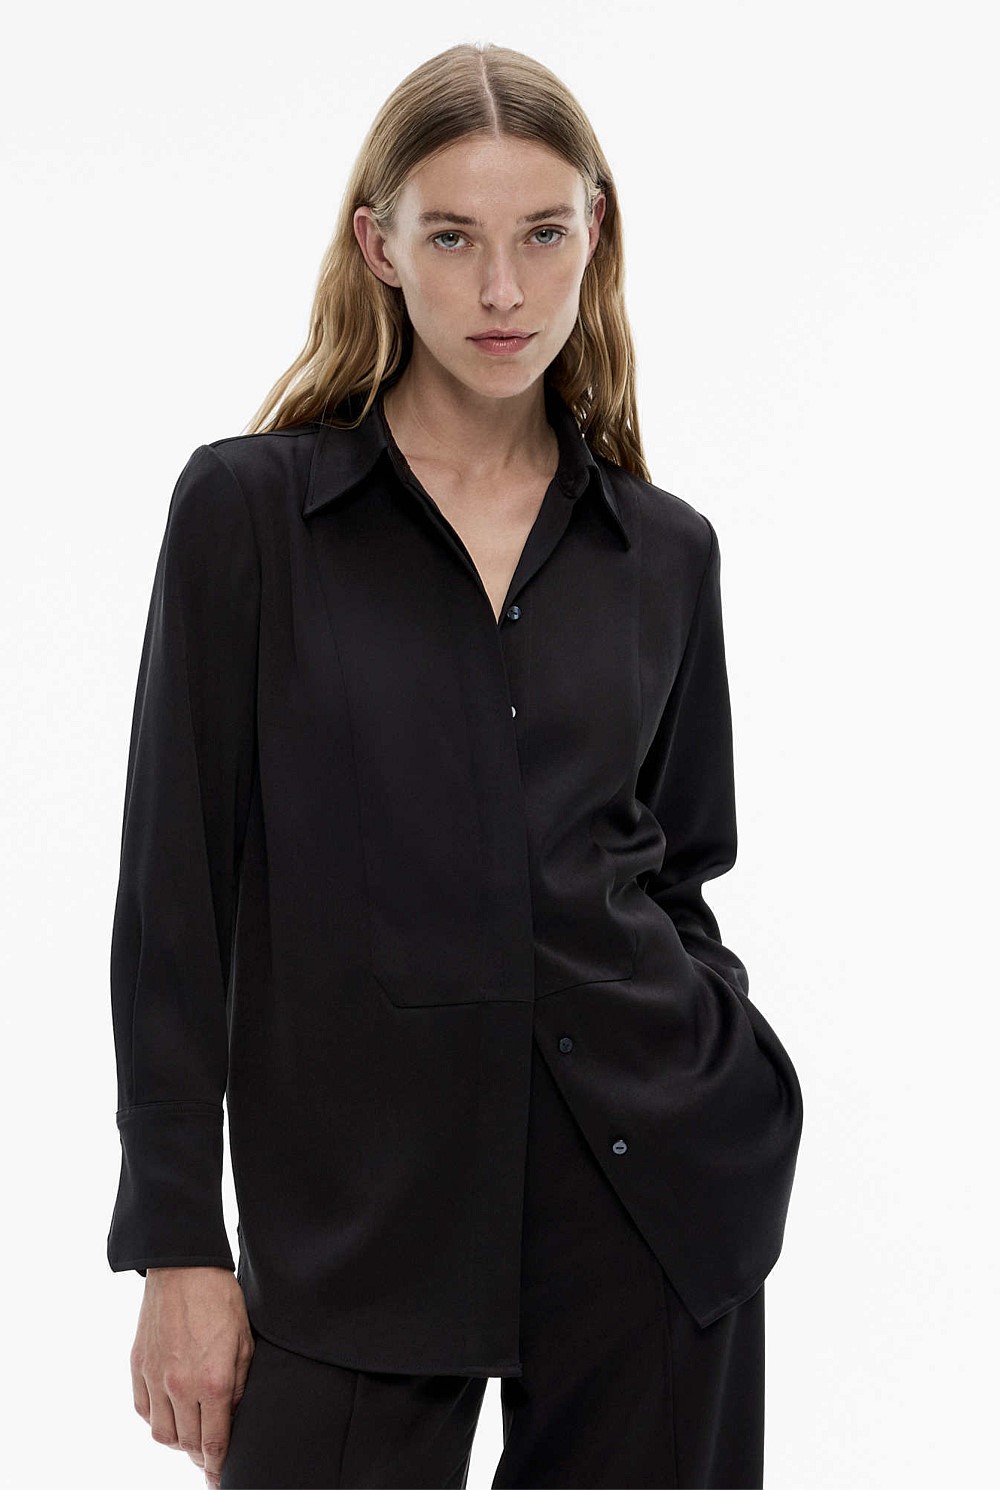 Shop New Season Witchery Online & In-store- Witchery